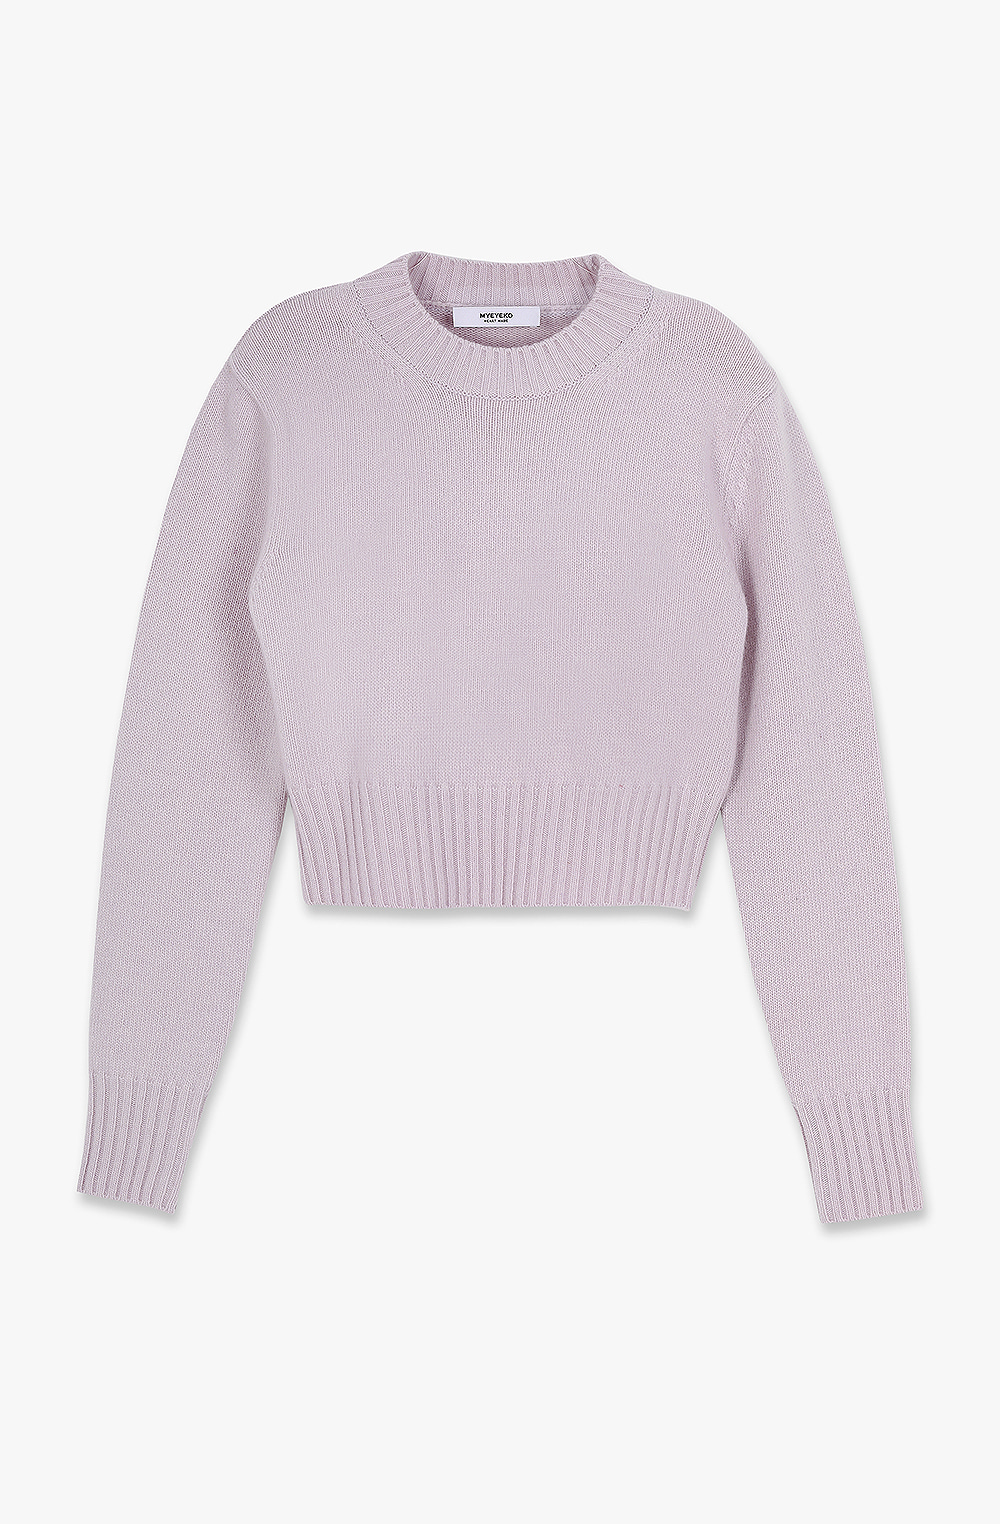 HIGH QUALITY LINE - ESSENTIAL / ROW Extra Fine Wool Round Neck KNIT (LIGHT PURPLE) Pre-order